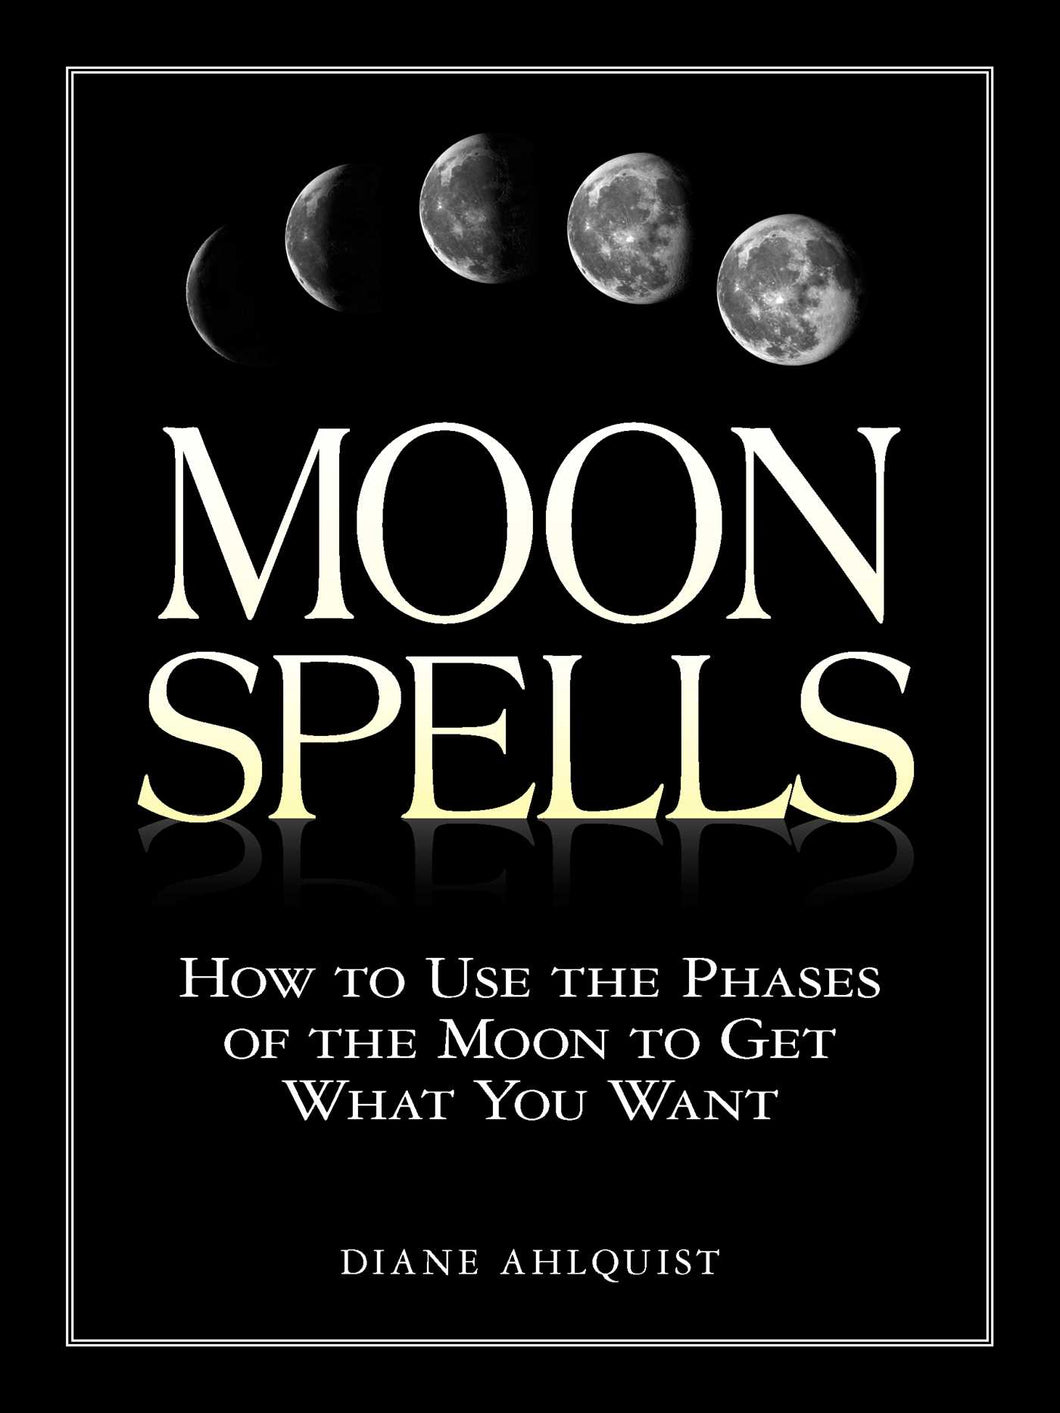 Moon Spells by Diane Ahlquist